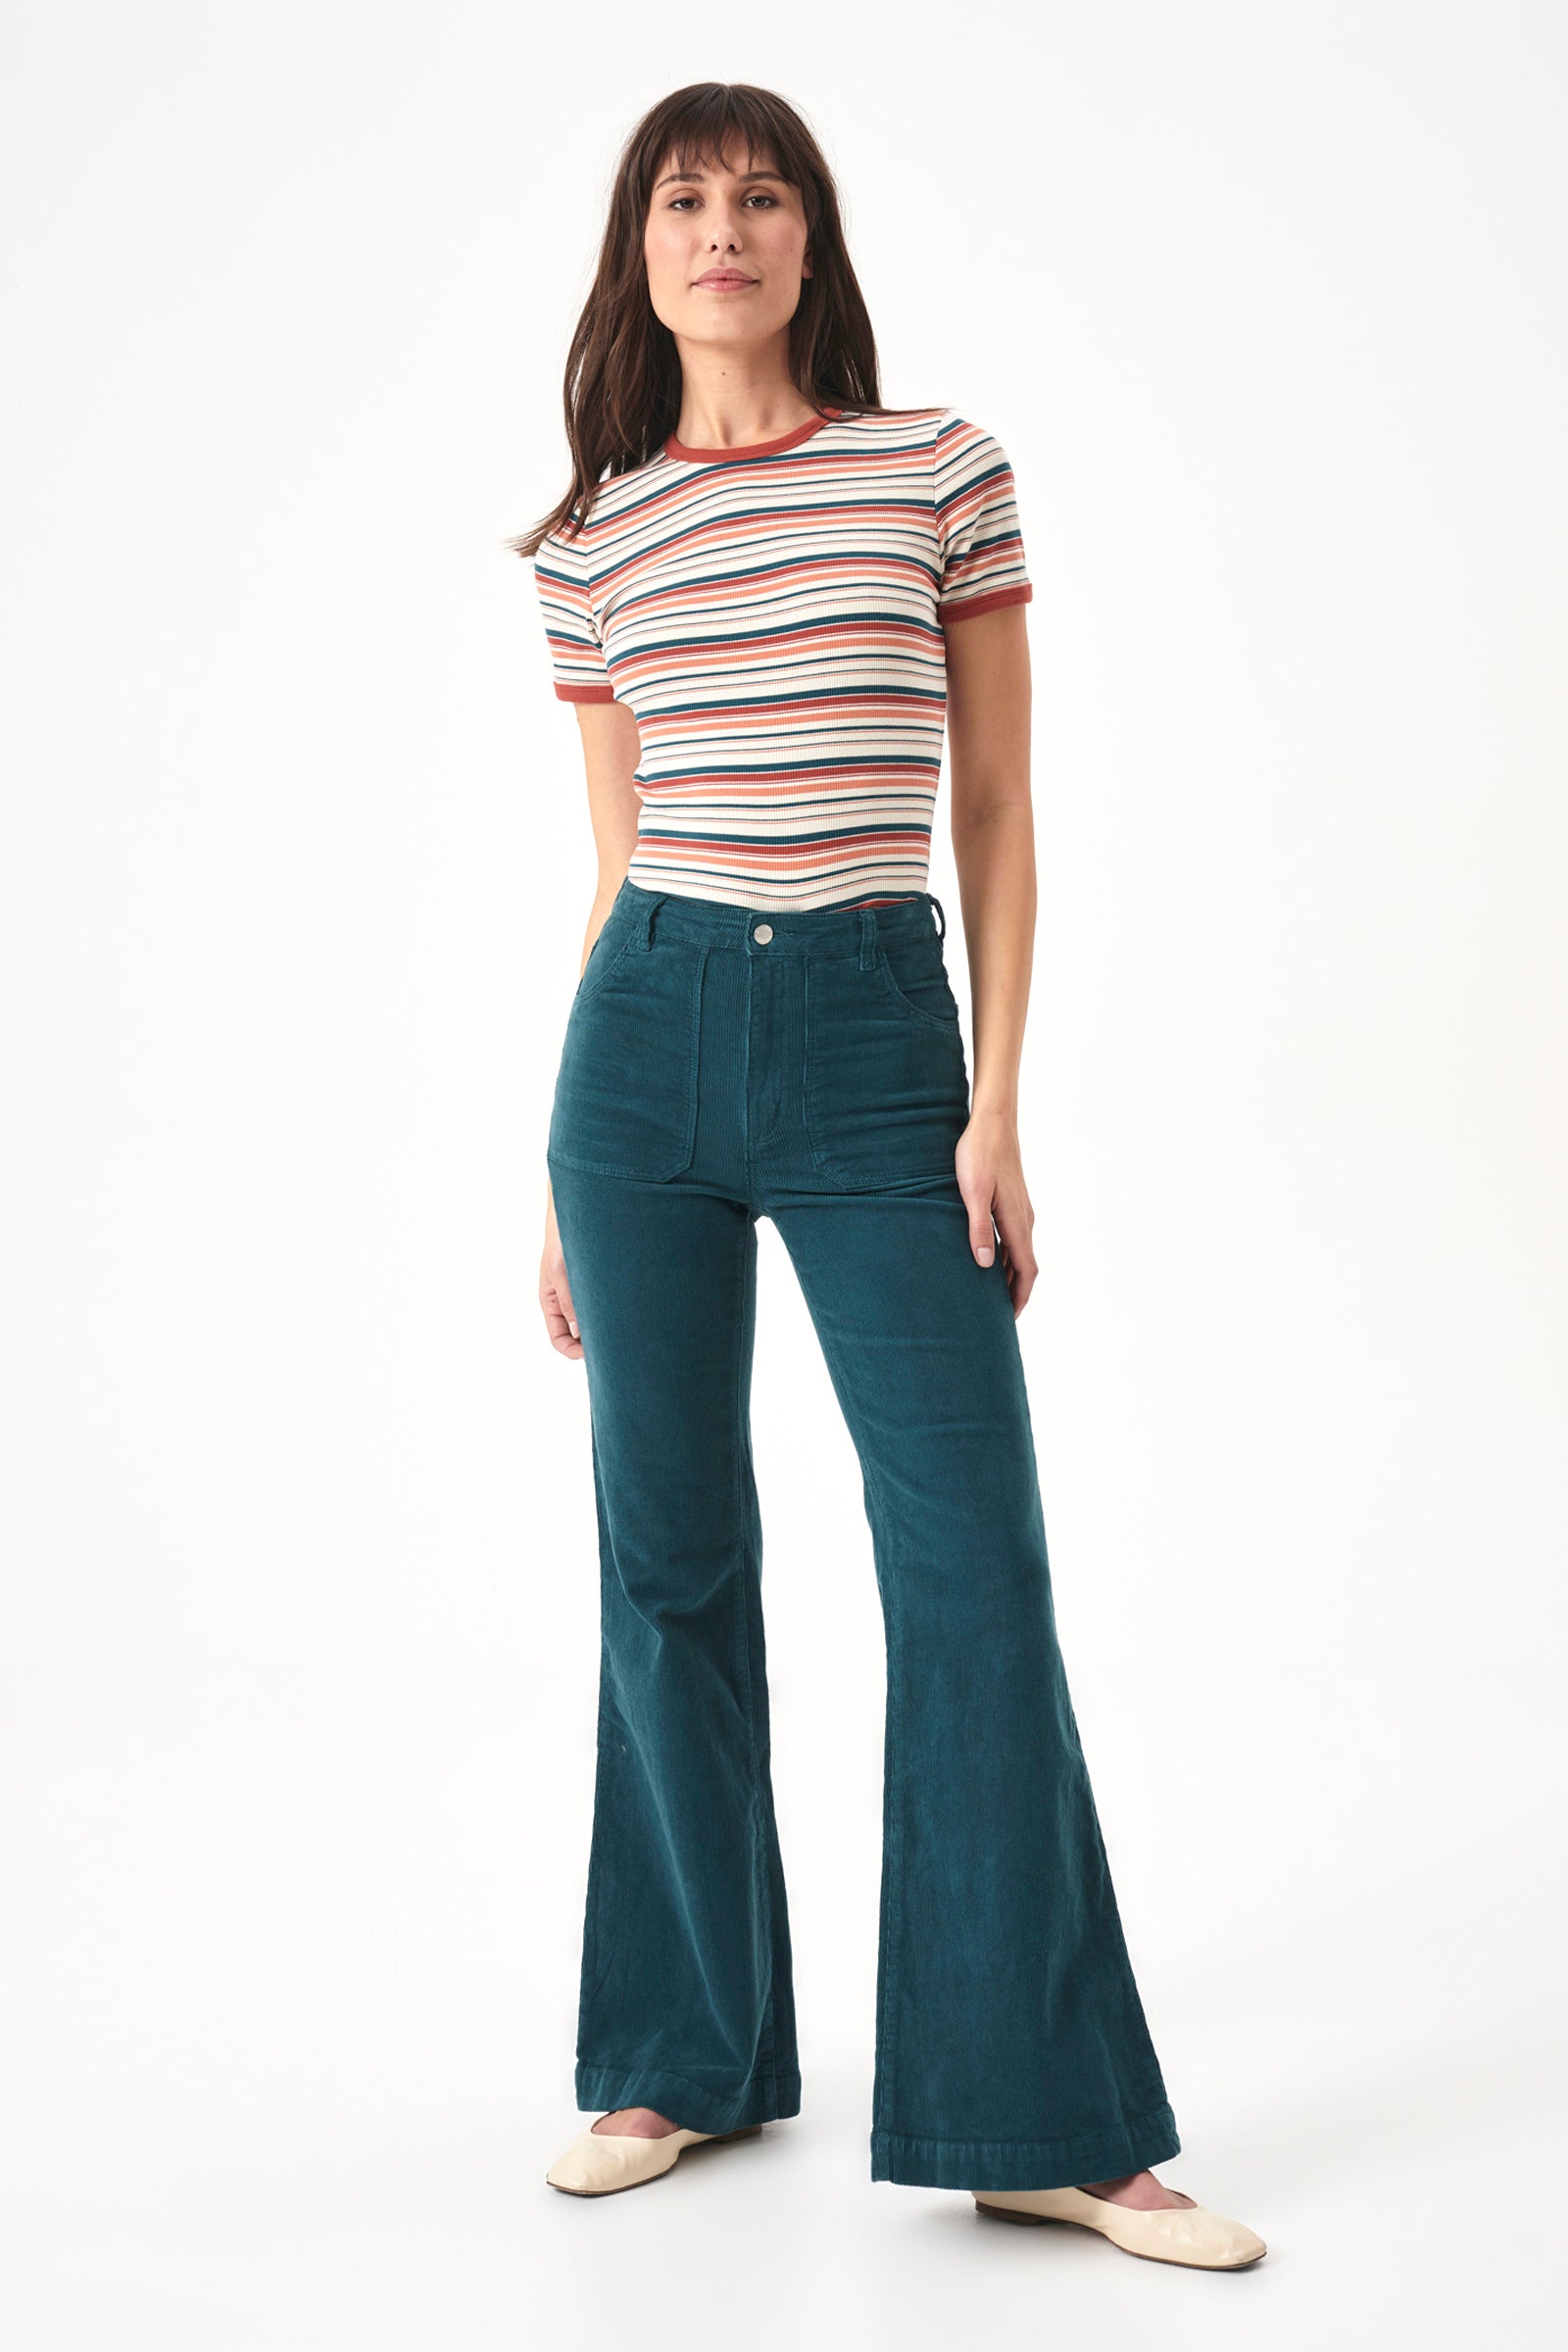 Buy Eastcoast Flare - Forest Cord Online | Rollas Jeans